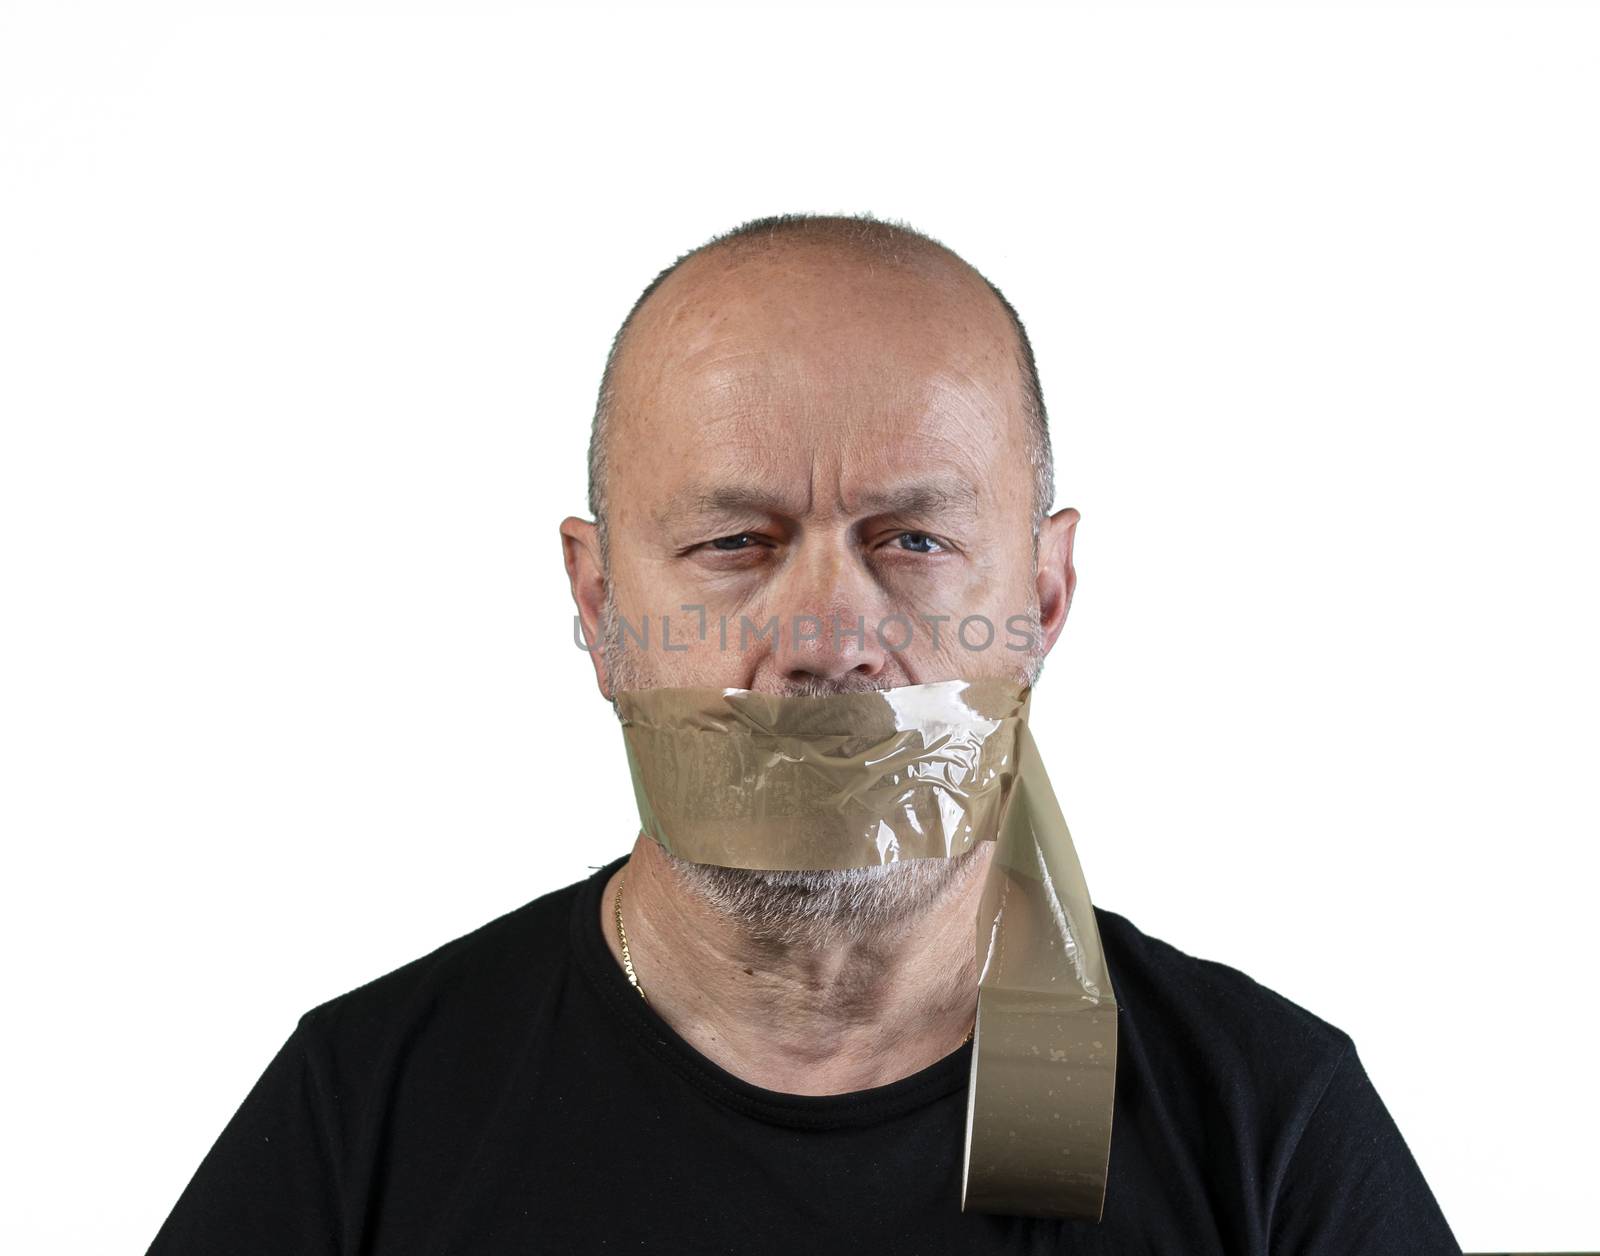 Mouth covered by tape by sergiodv